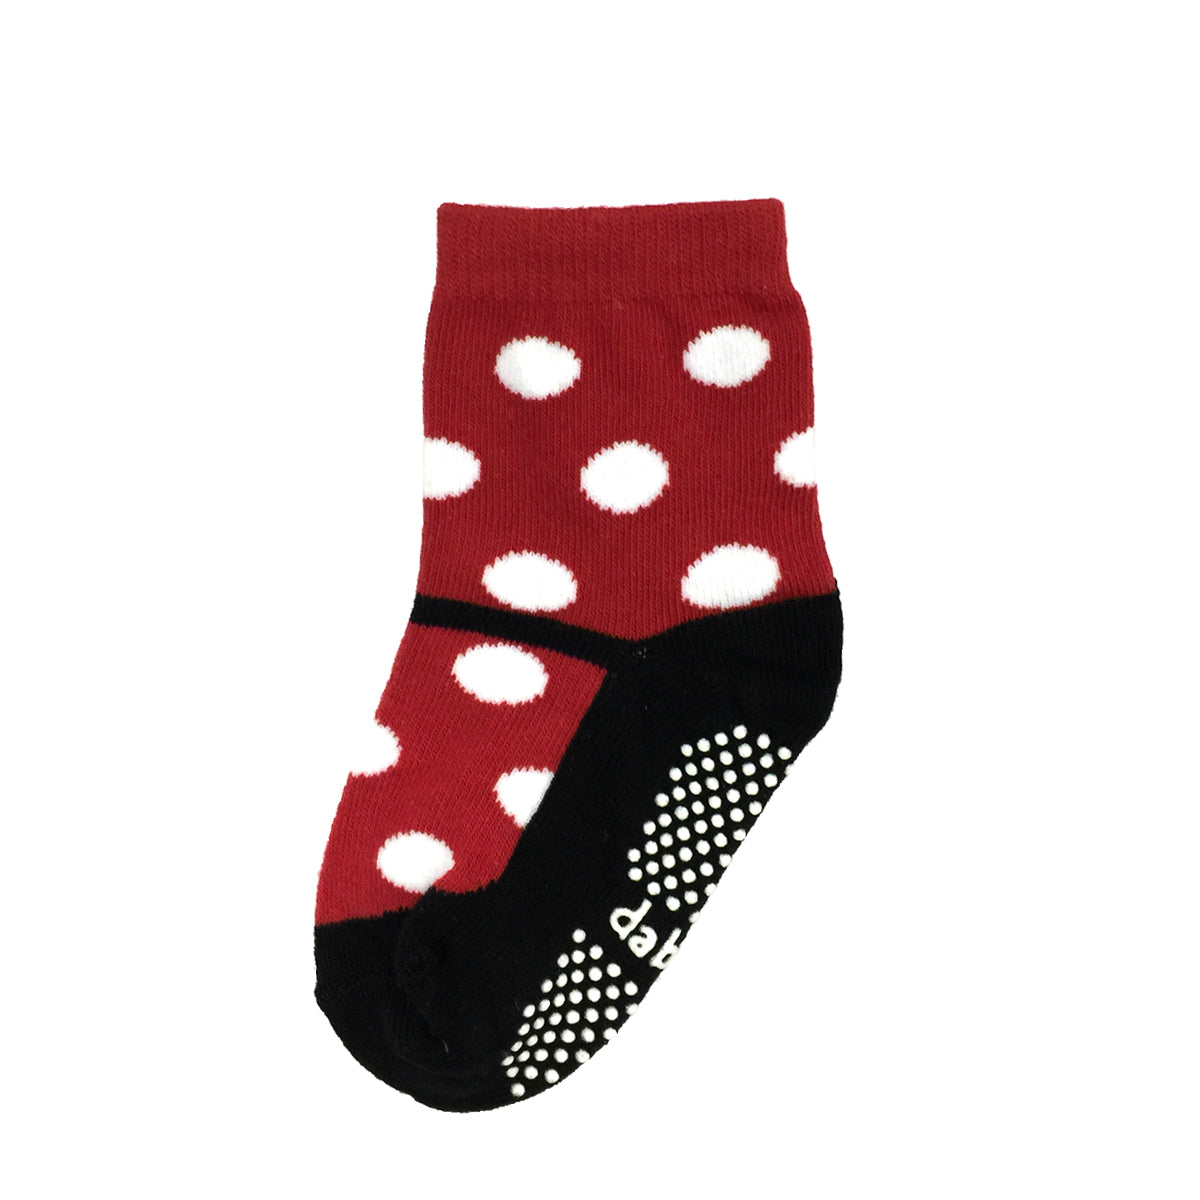 Wrapables Non-Slip Cute Mary Jane Socks for Baby (Set of 5)